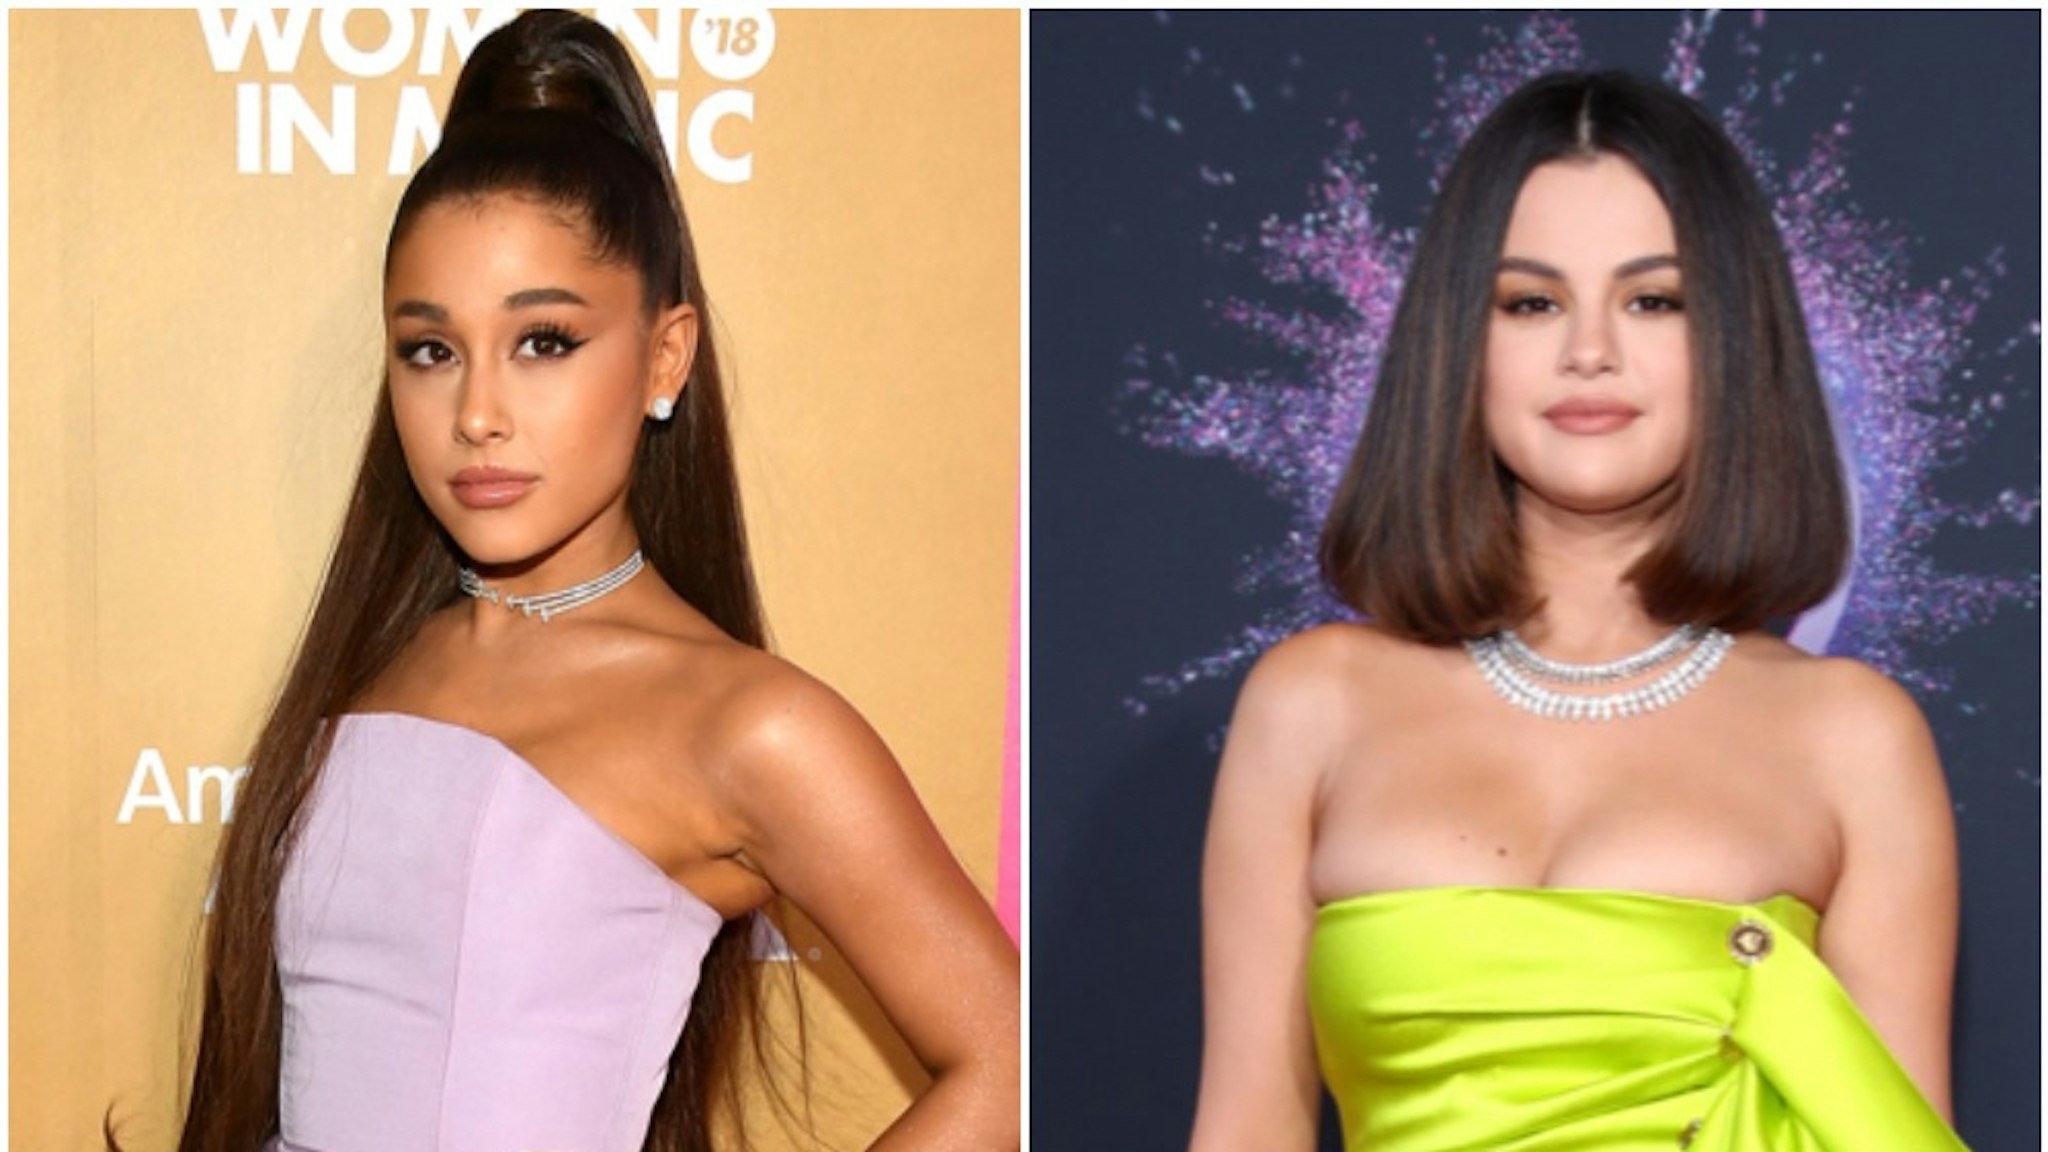 Ariana Grande attends Billboard's 13th Annual Women in Music Event at Pier 36 on December 06, 2018 in New York City. Selena Gomez attends the 2019 American Music Awards at Microsoft Theater on November 24, 2019 in Los Angeles, California.